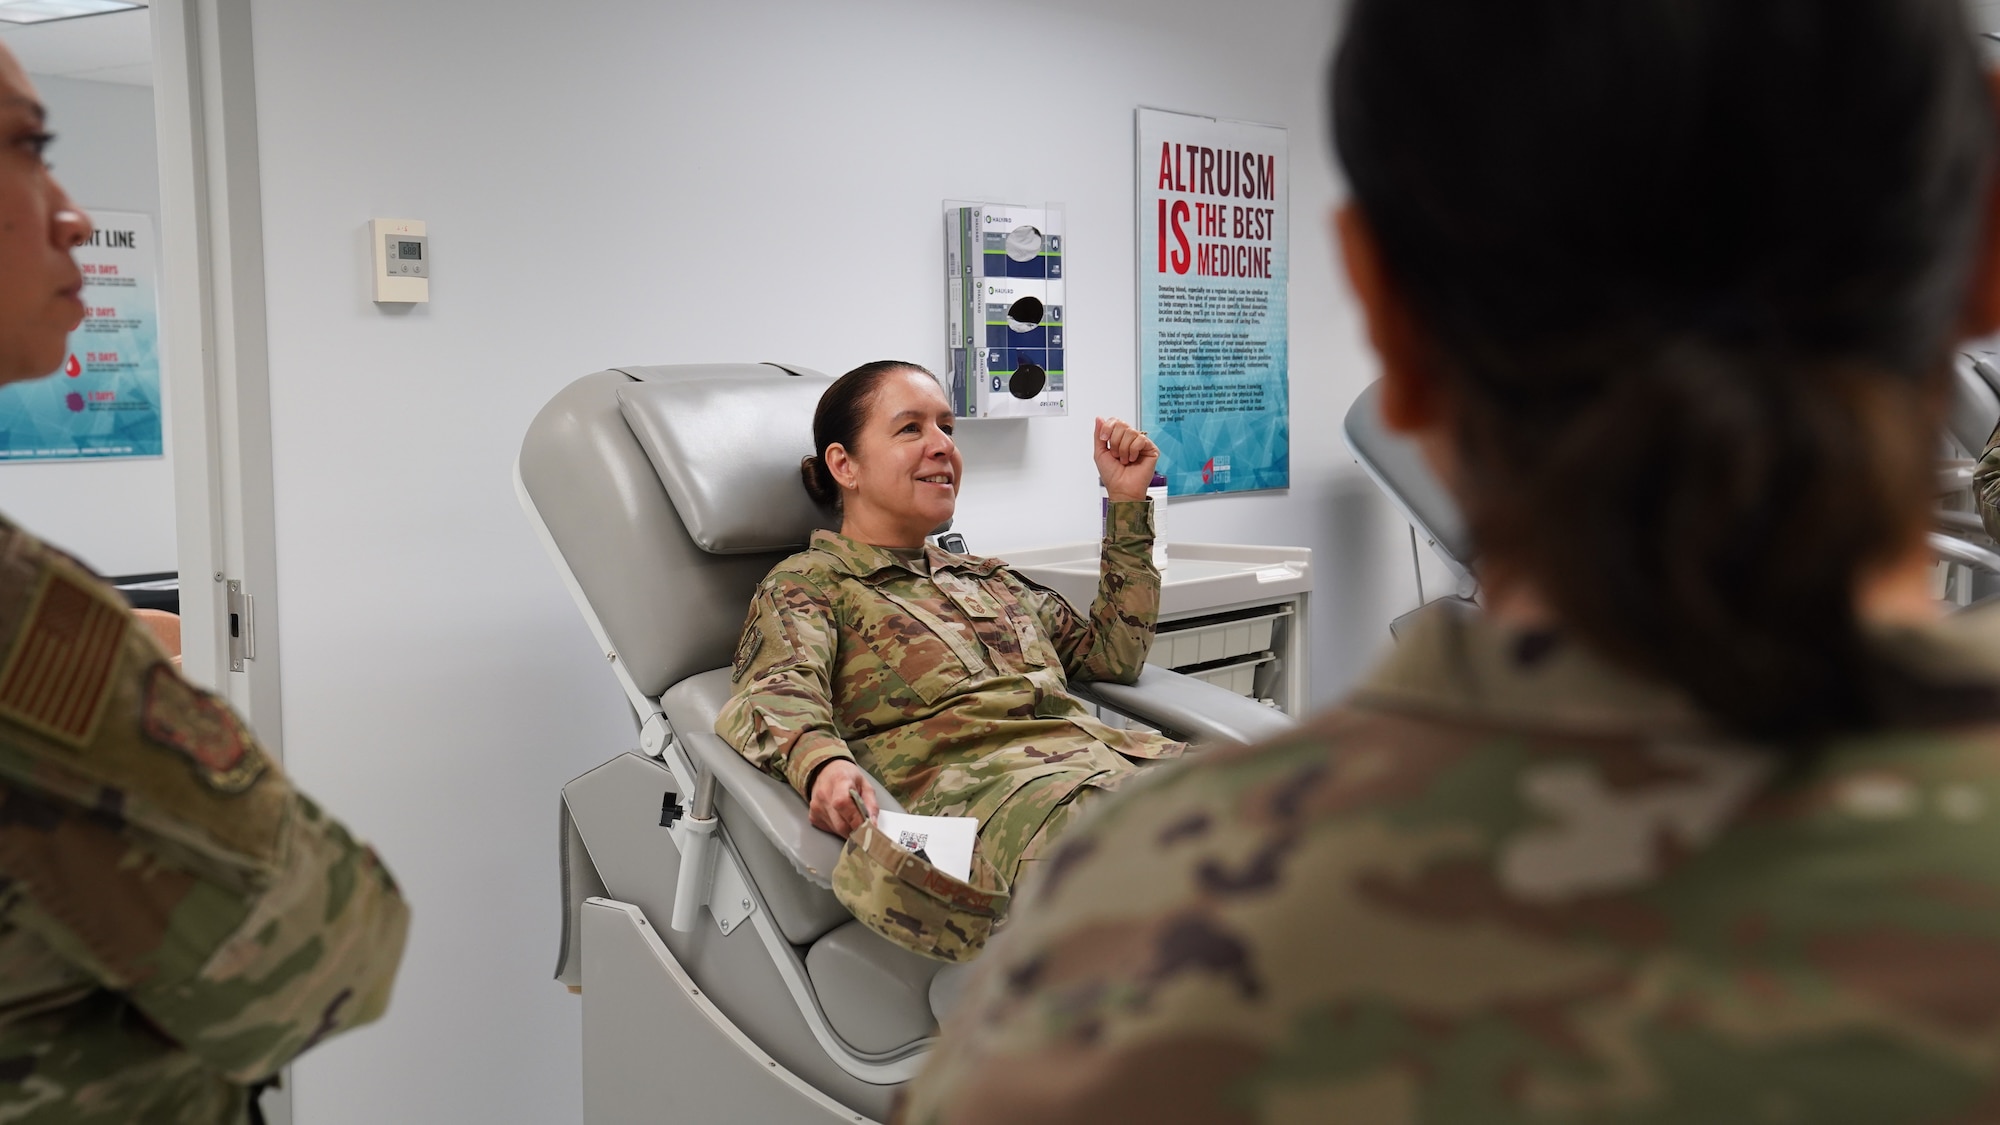 U.S. Air Force Chief Master Sgt. Paula Eischen, 81st MDG senior enlisted leader, lays in a donation chair at the Blood Donation Center during their open house at Keesler Air Force Base, Mississippi, Sept. 9, 2022. The BDC’s mission is to support the Armed Services Blood Program by collecting, processing, storing, distributing and transfusing blood worldwide in times of peace and war.